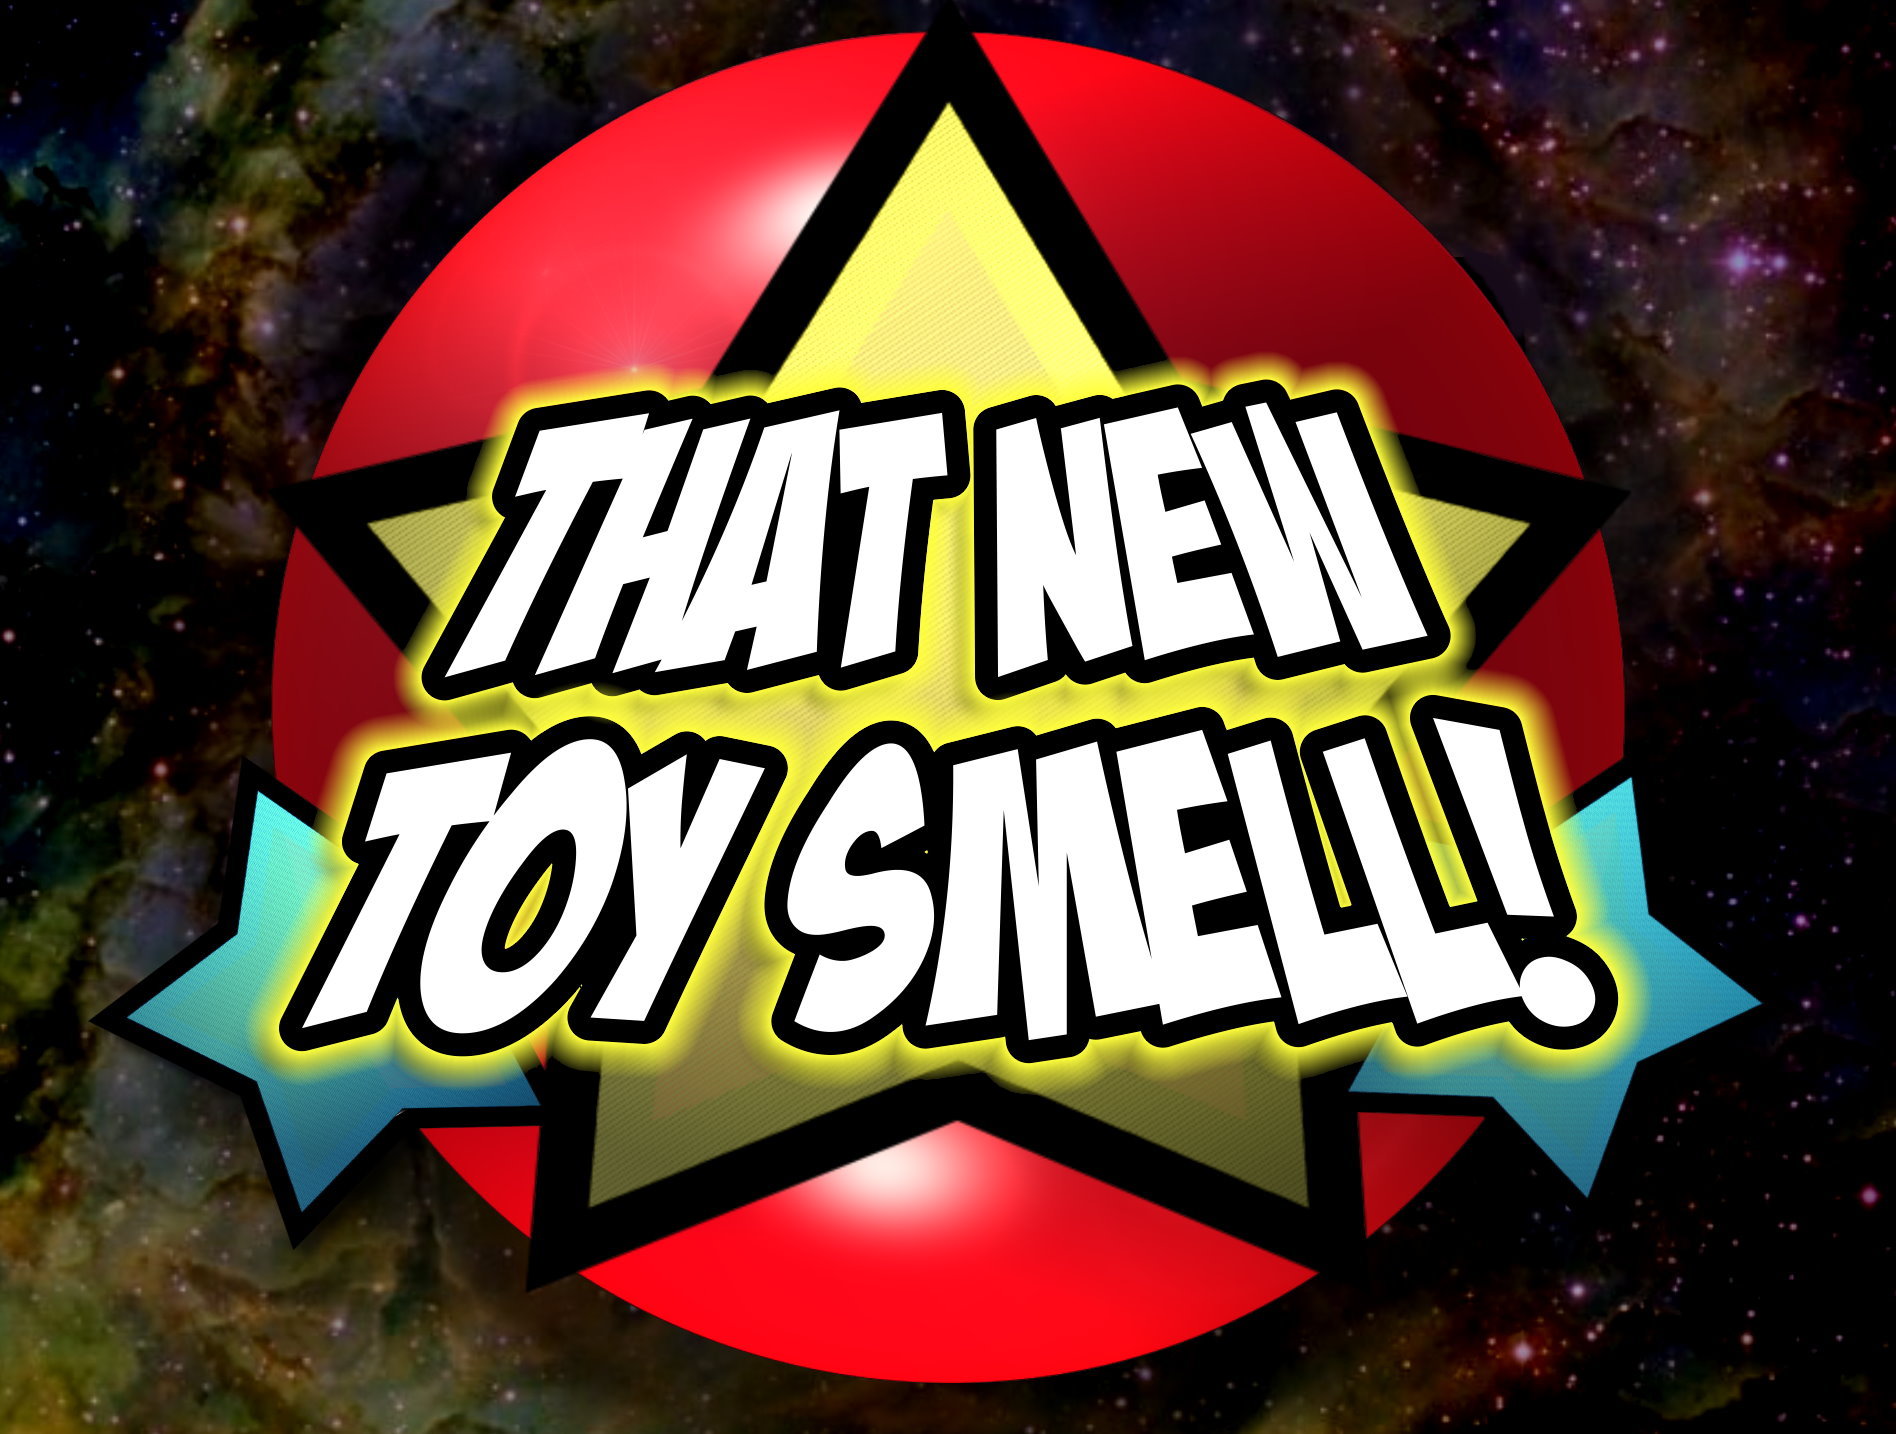 That New Toy Smell Episode 21 featuring The Toyman Show